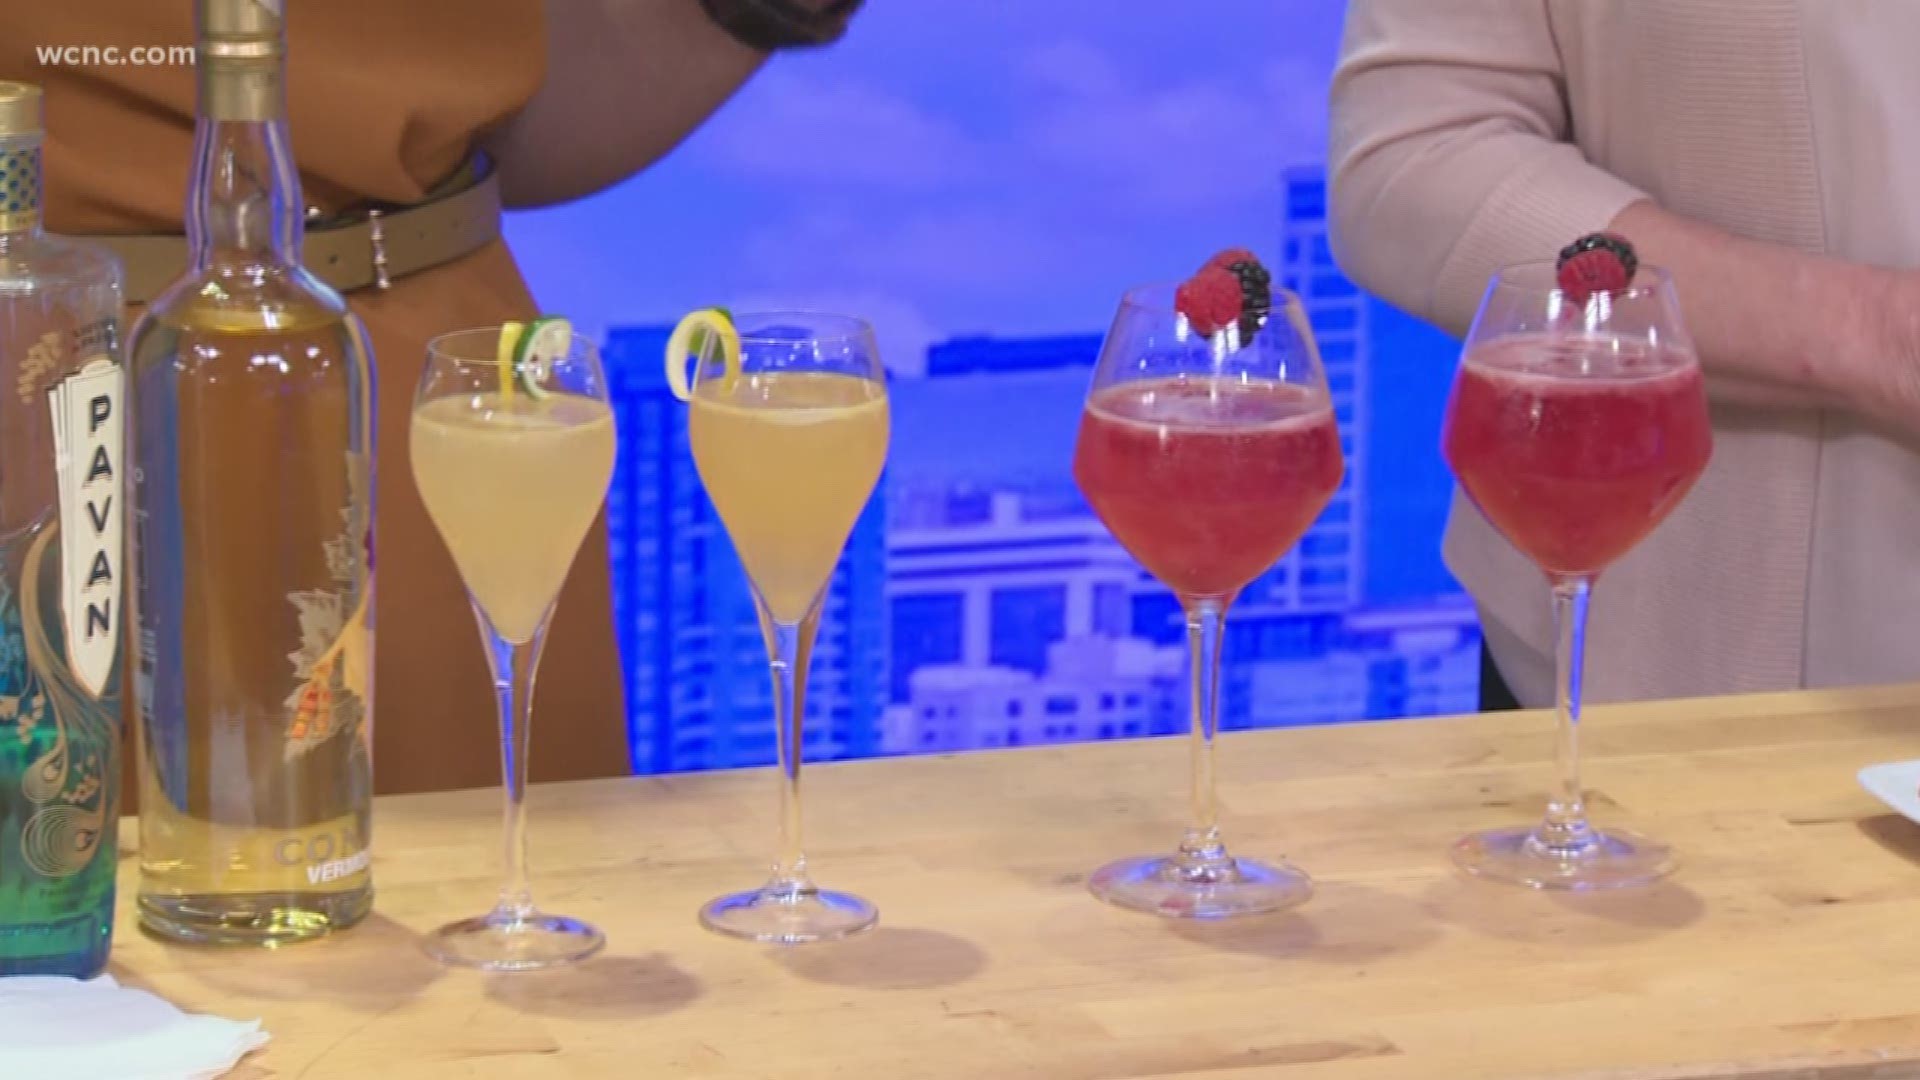 Catherine Rabb and Sarah Malik show us how to make cocktails with wine.